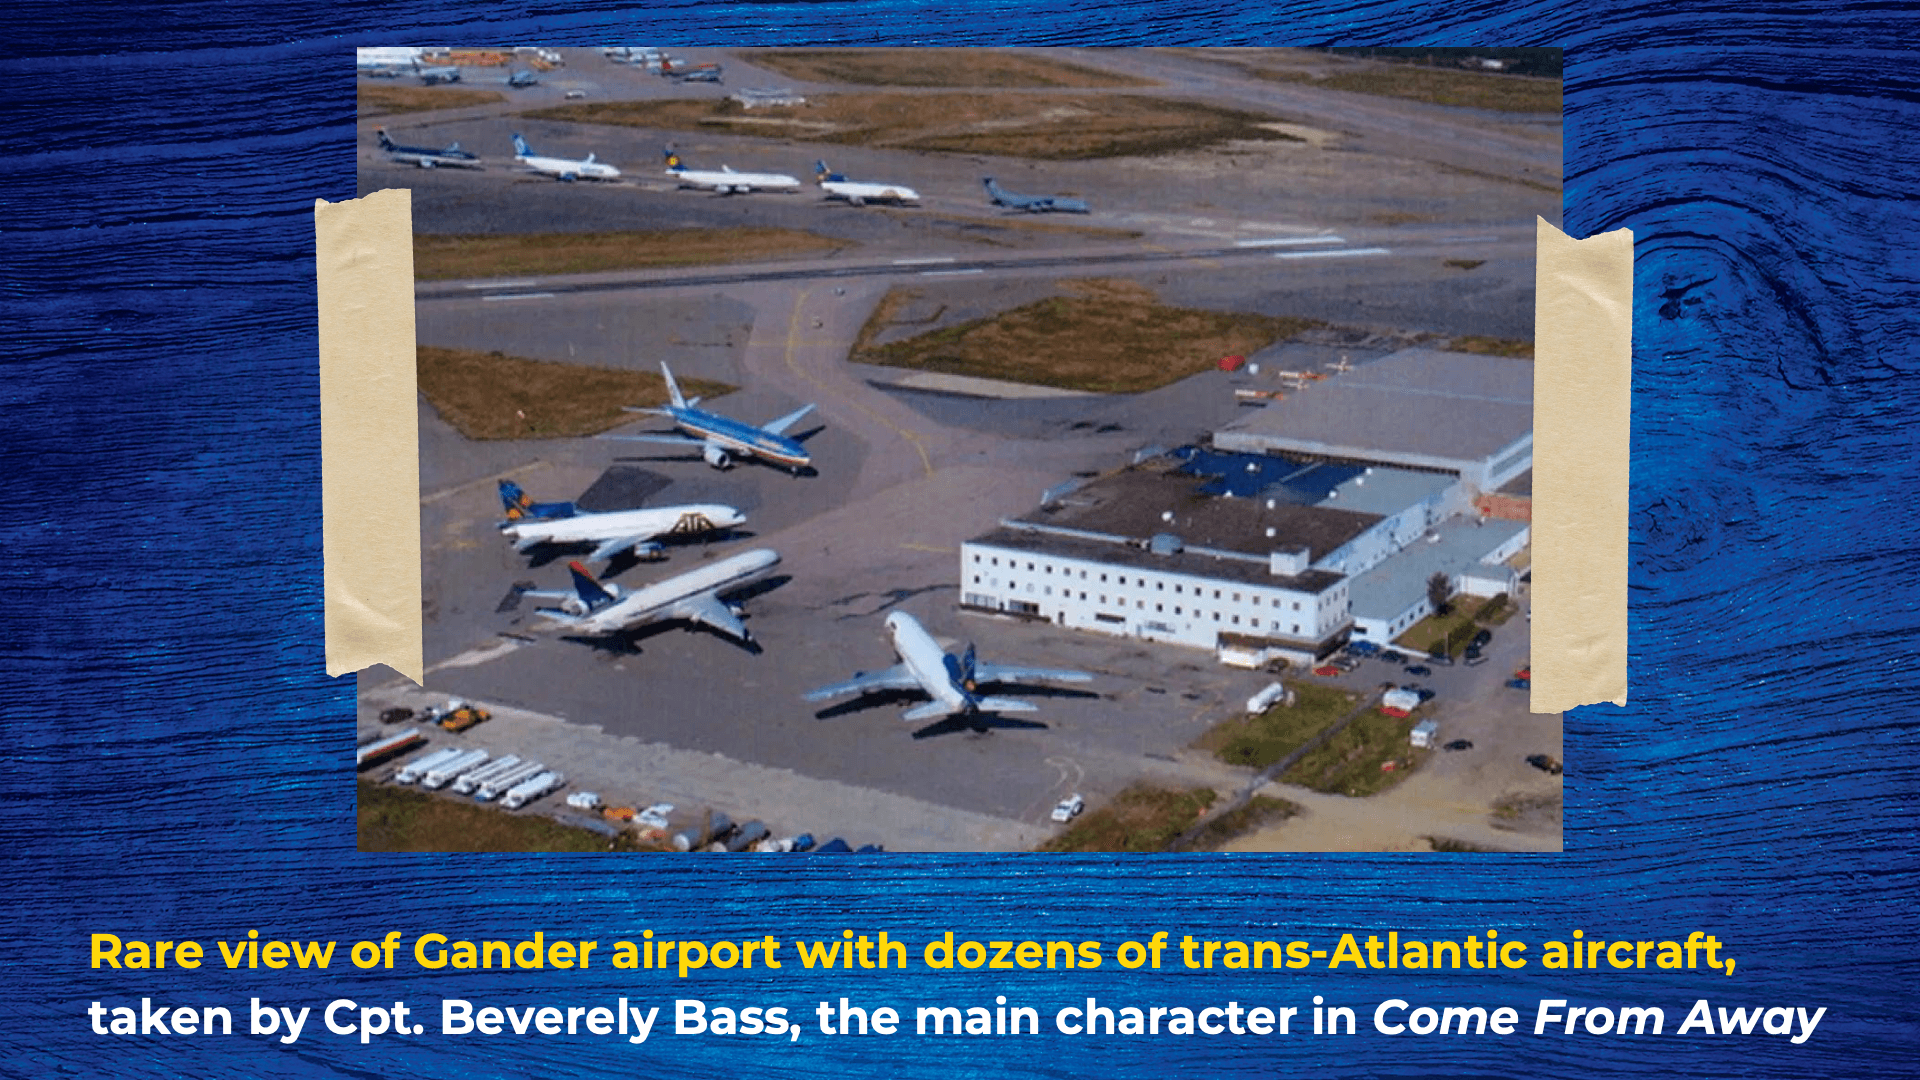 Rare view of Gander airport with dozens of trans-Atlantic aircraft, taken by Cpt. Beverely Bass, the main character in Come From Away